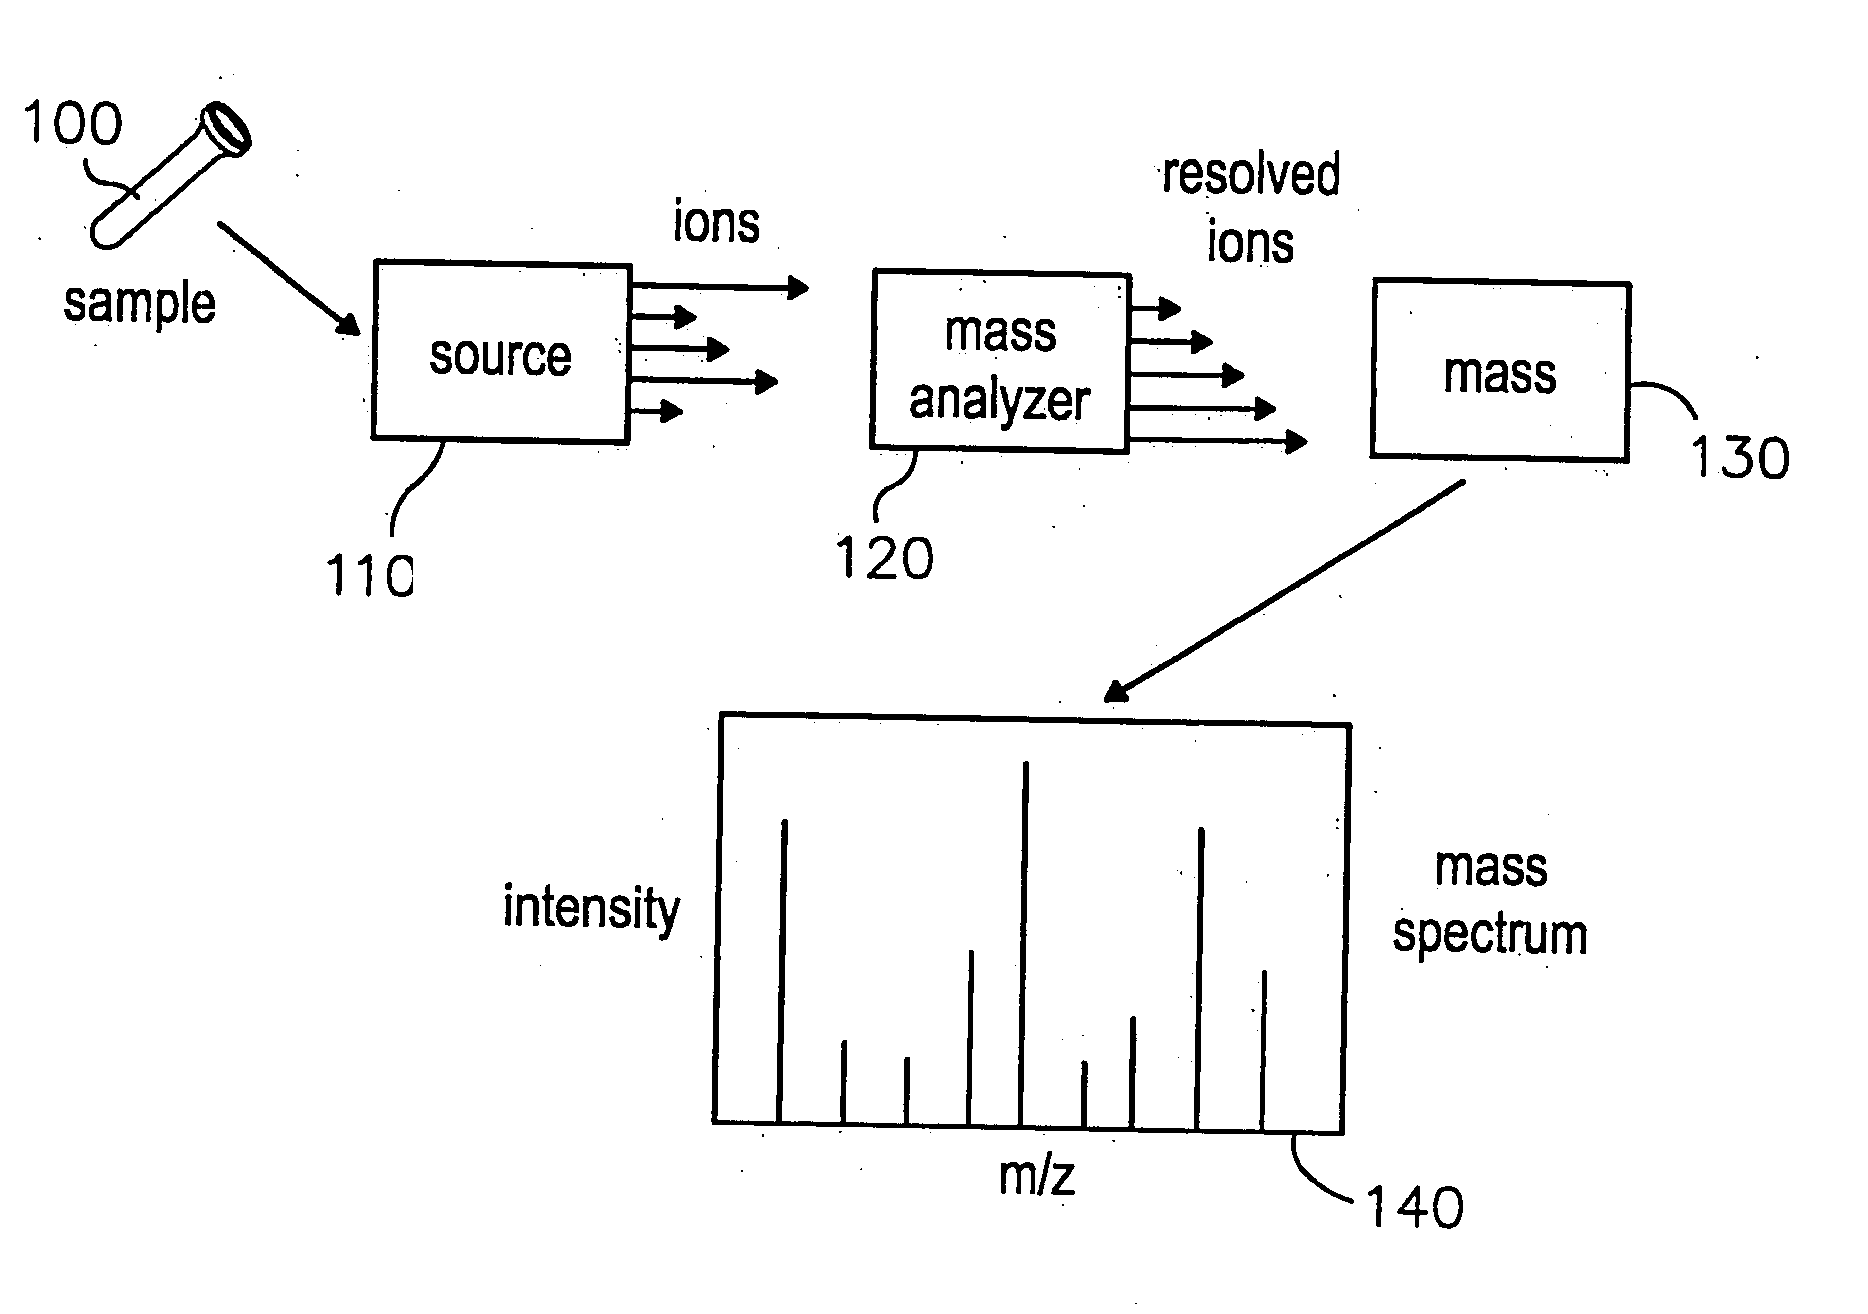 System and methods for navigating and visualizing multi-dimensional biological data